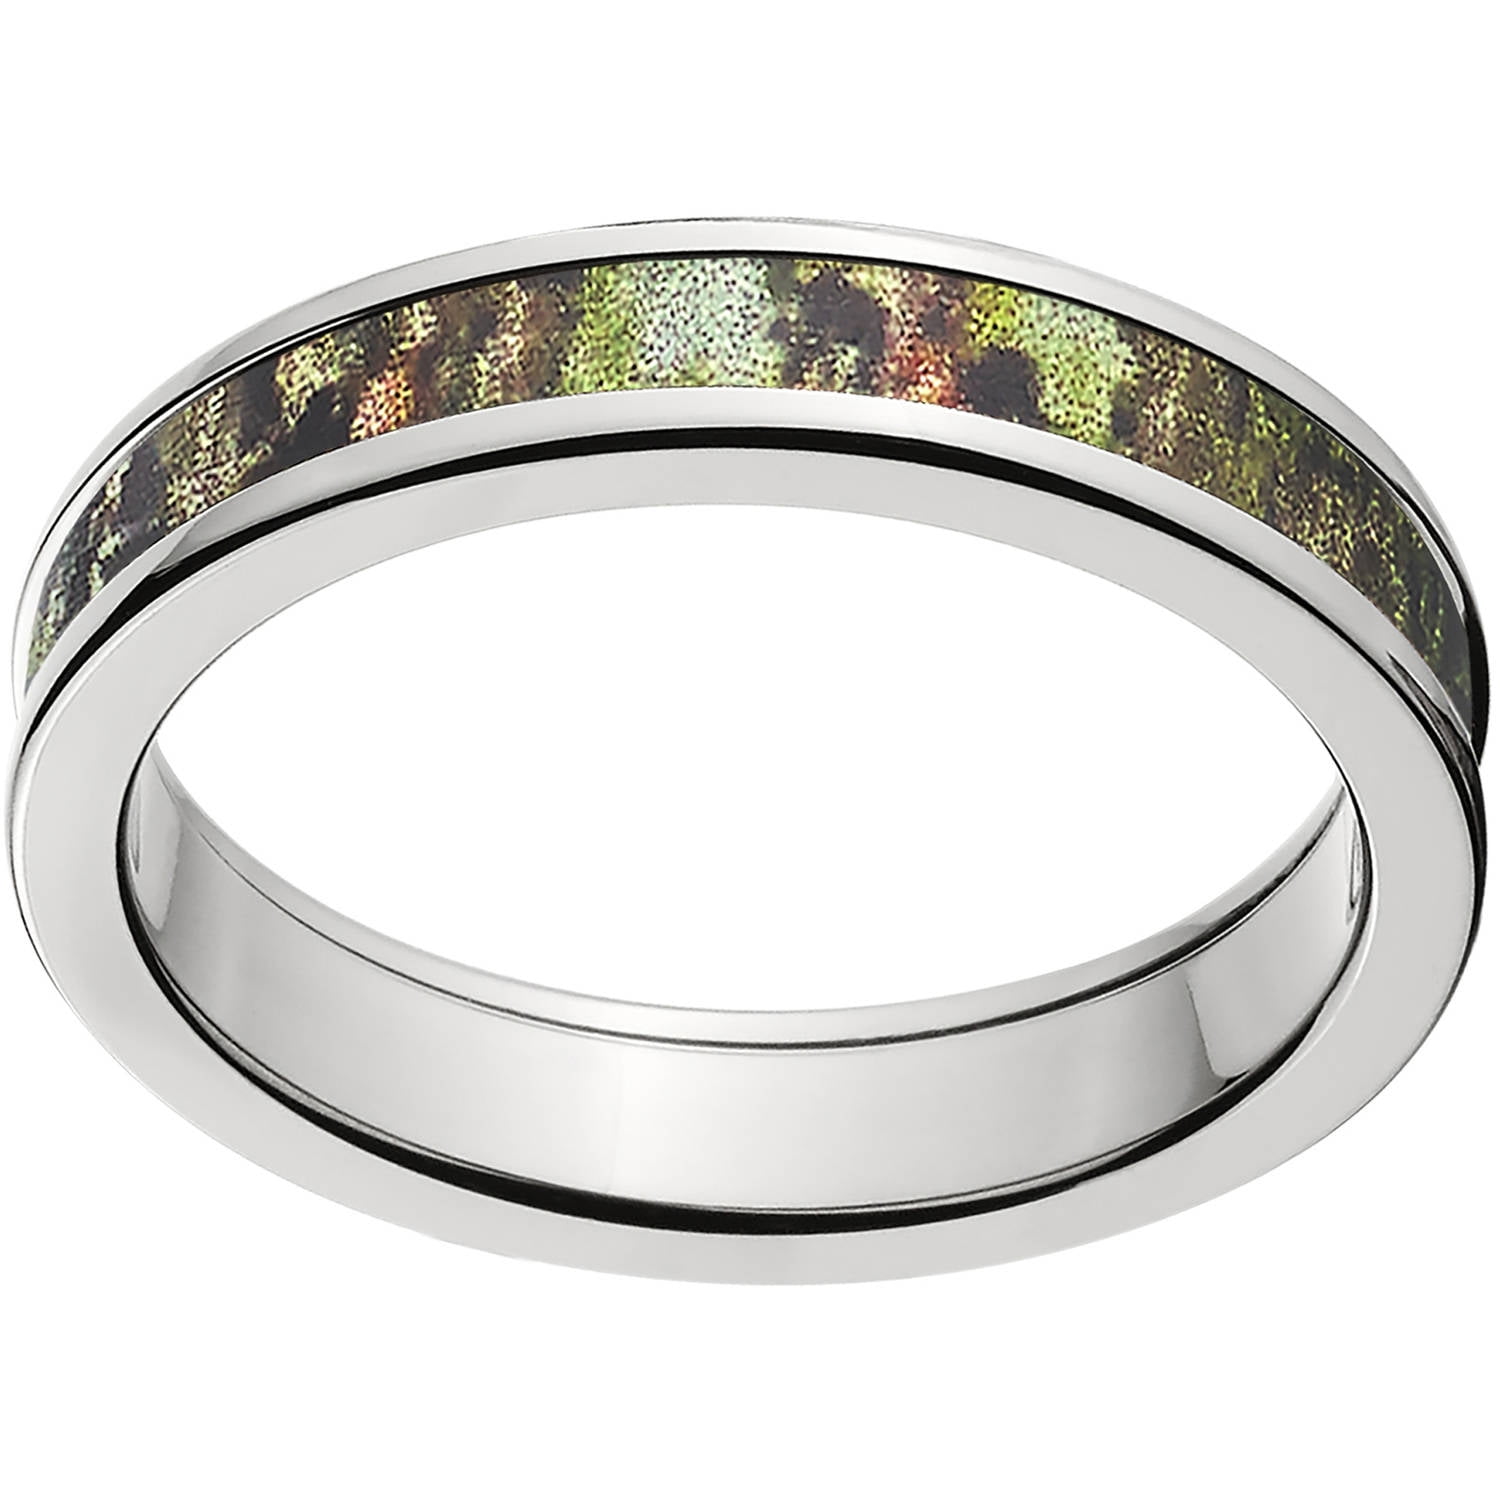 New Mossy Oak Silicone Wedding Bands from Groove Rings | Mossy Oak